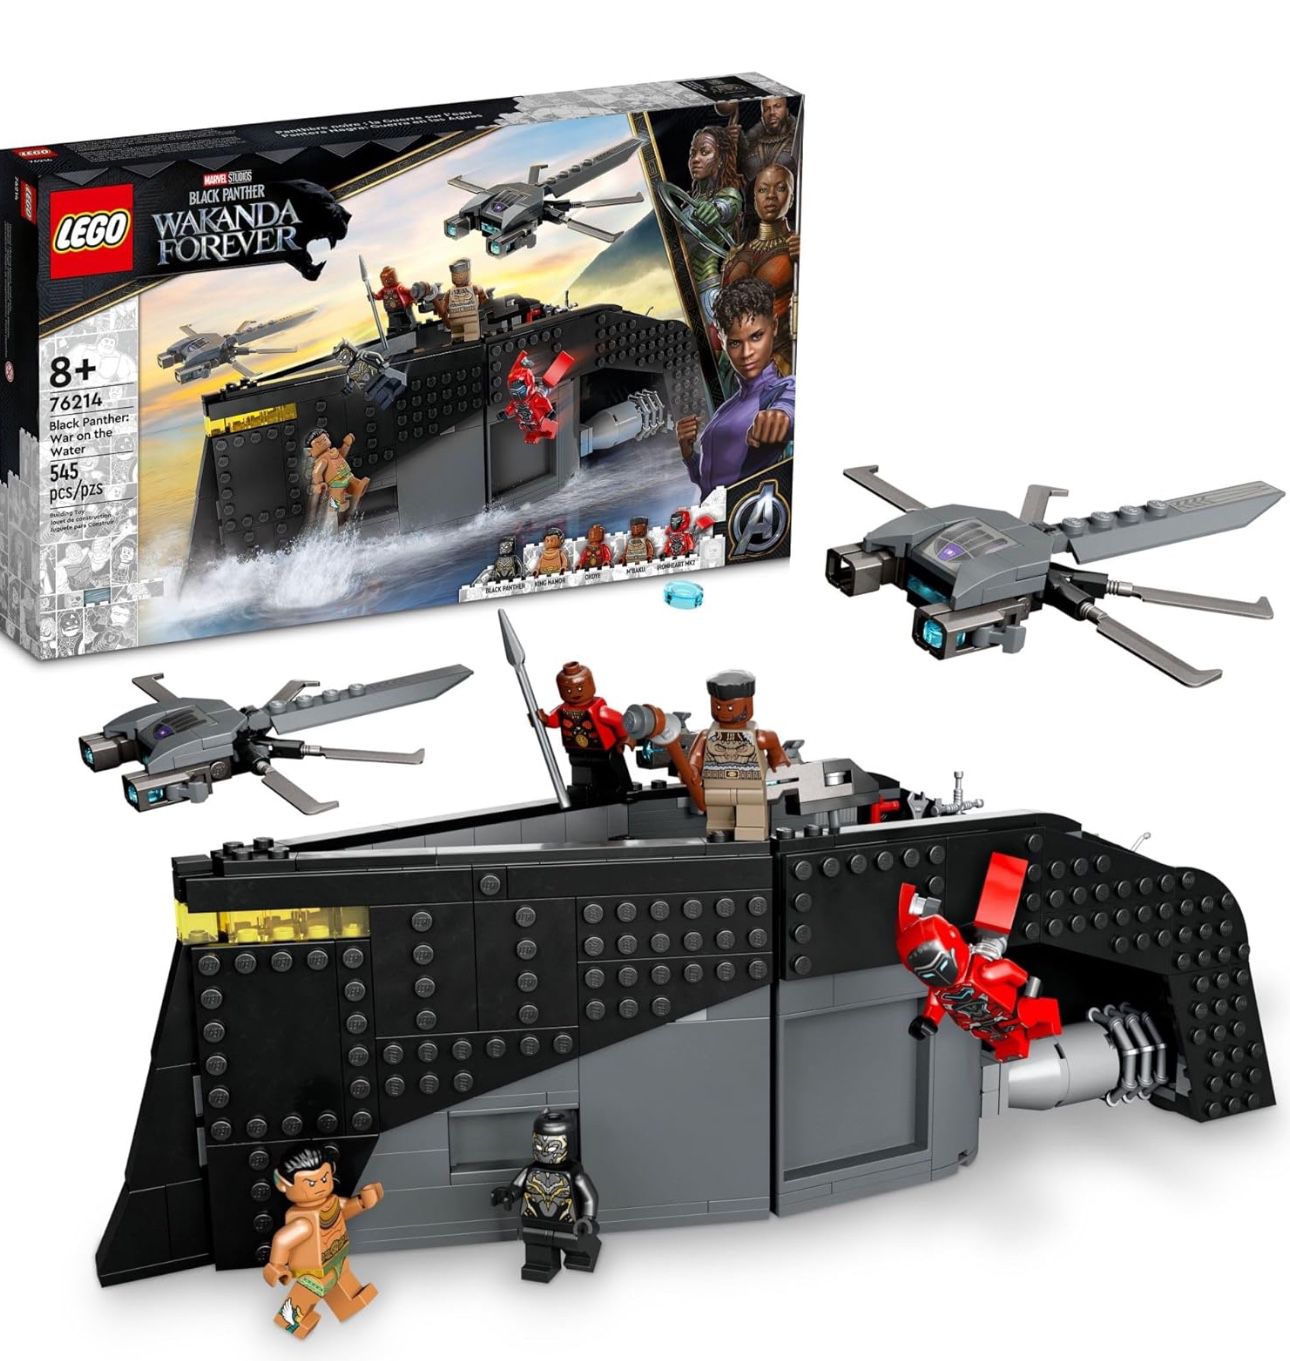 LEGO Marvel Black Panther: War on The Water, 76214